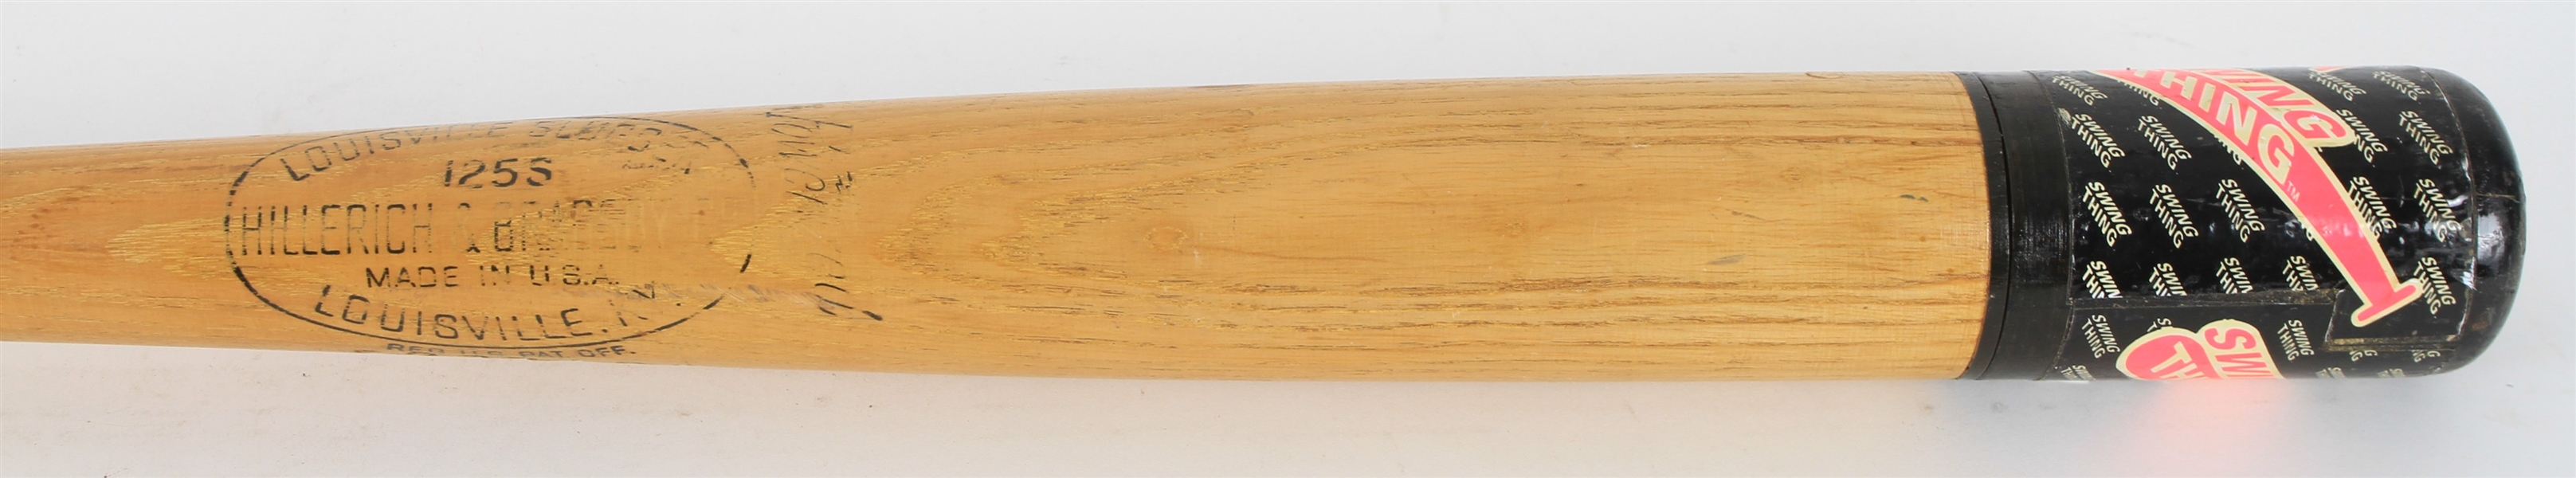 1970s Hillerich & Bradsby Louisville Slugger Store Model Bat w/ Weighted Swing Thing Attachment